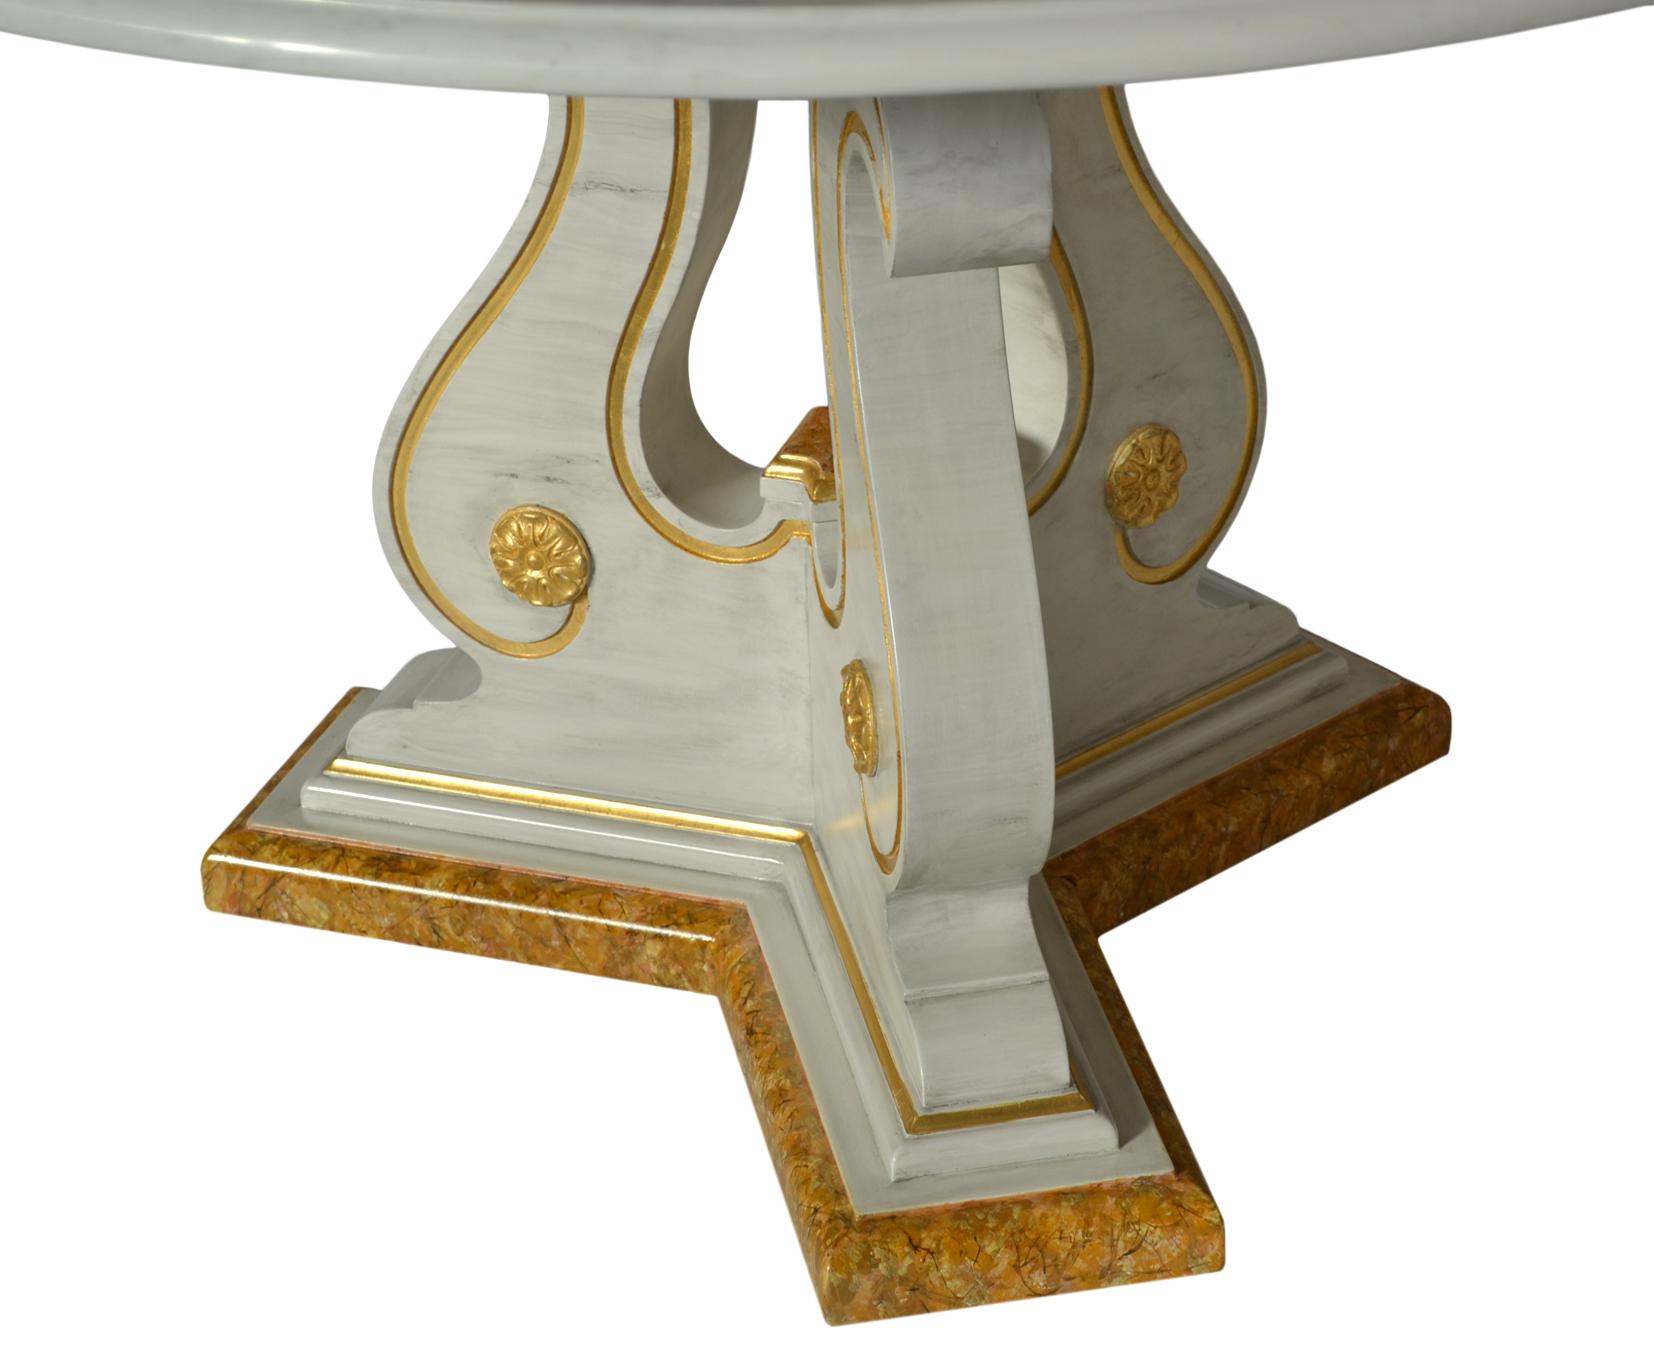 Hand-Crafted Dining table marble and scagliola inlays, handmade in Italy by Cupioli available For Sale